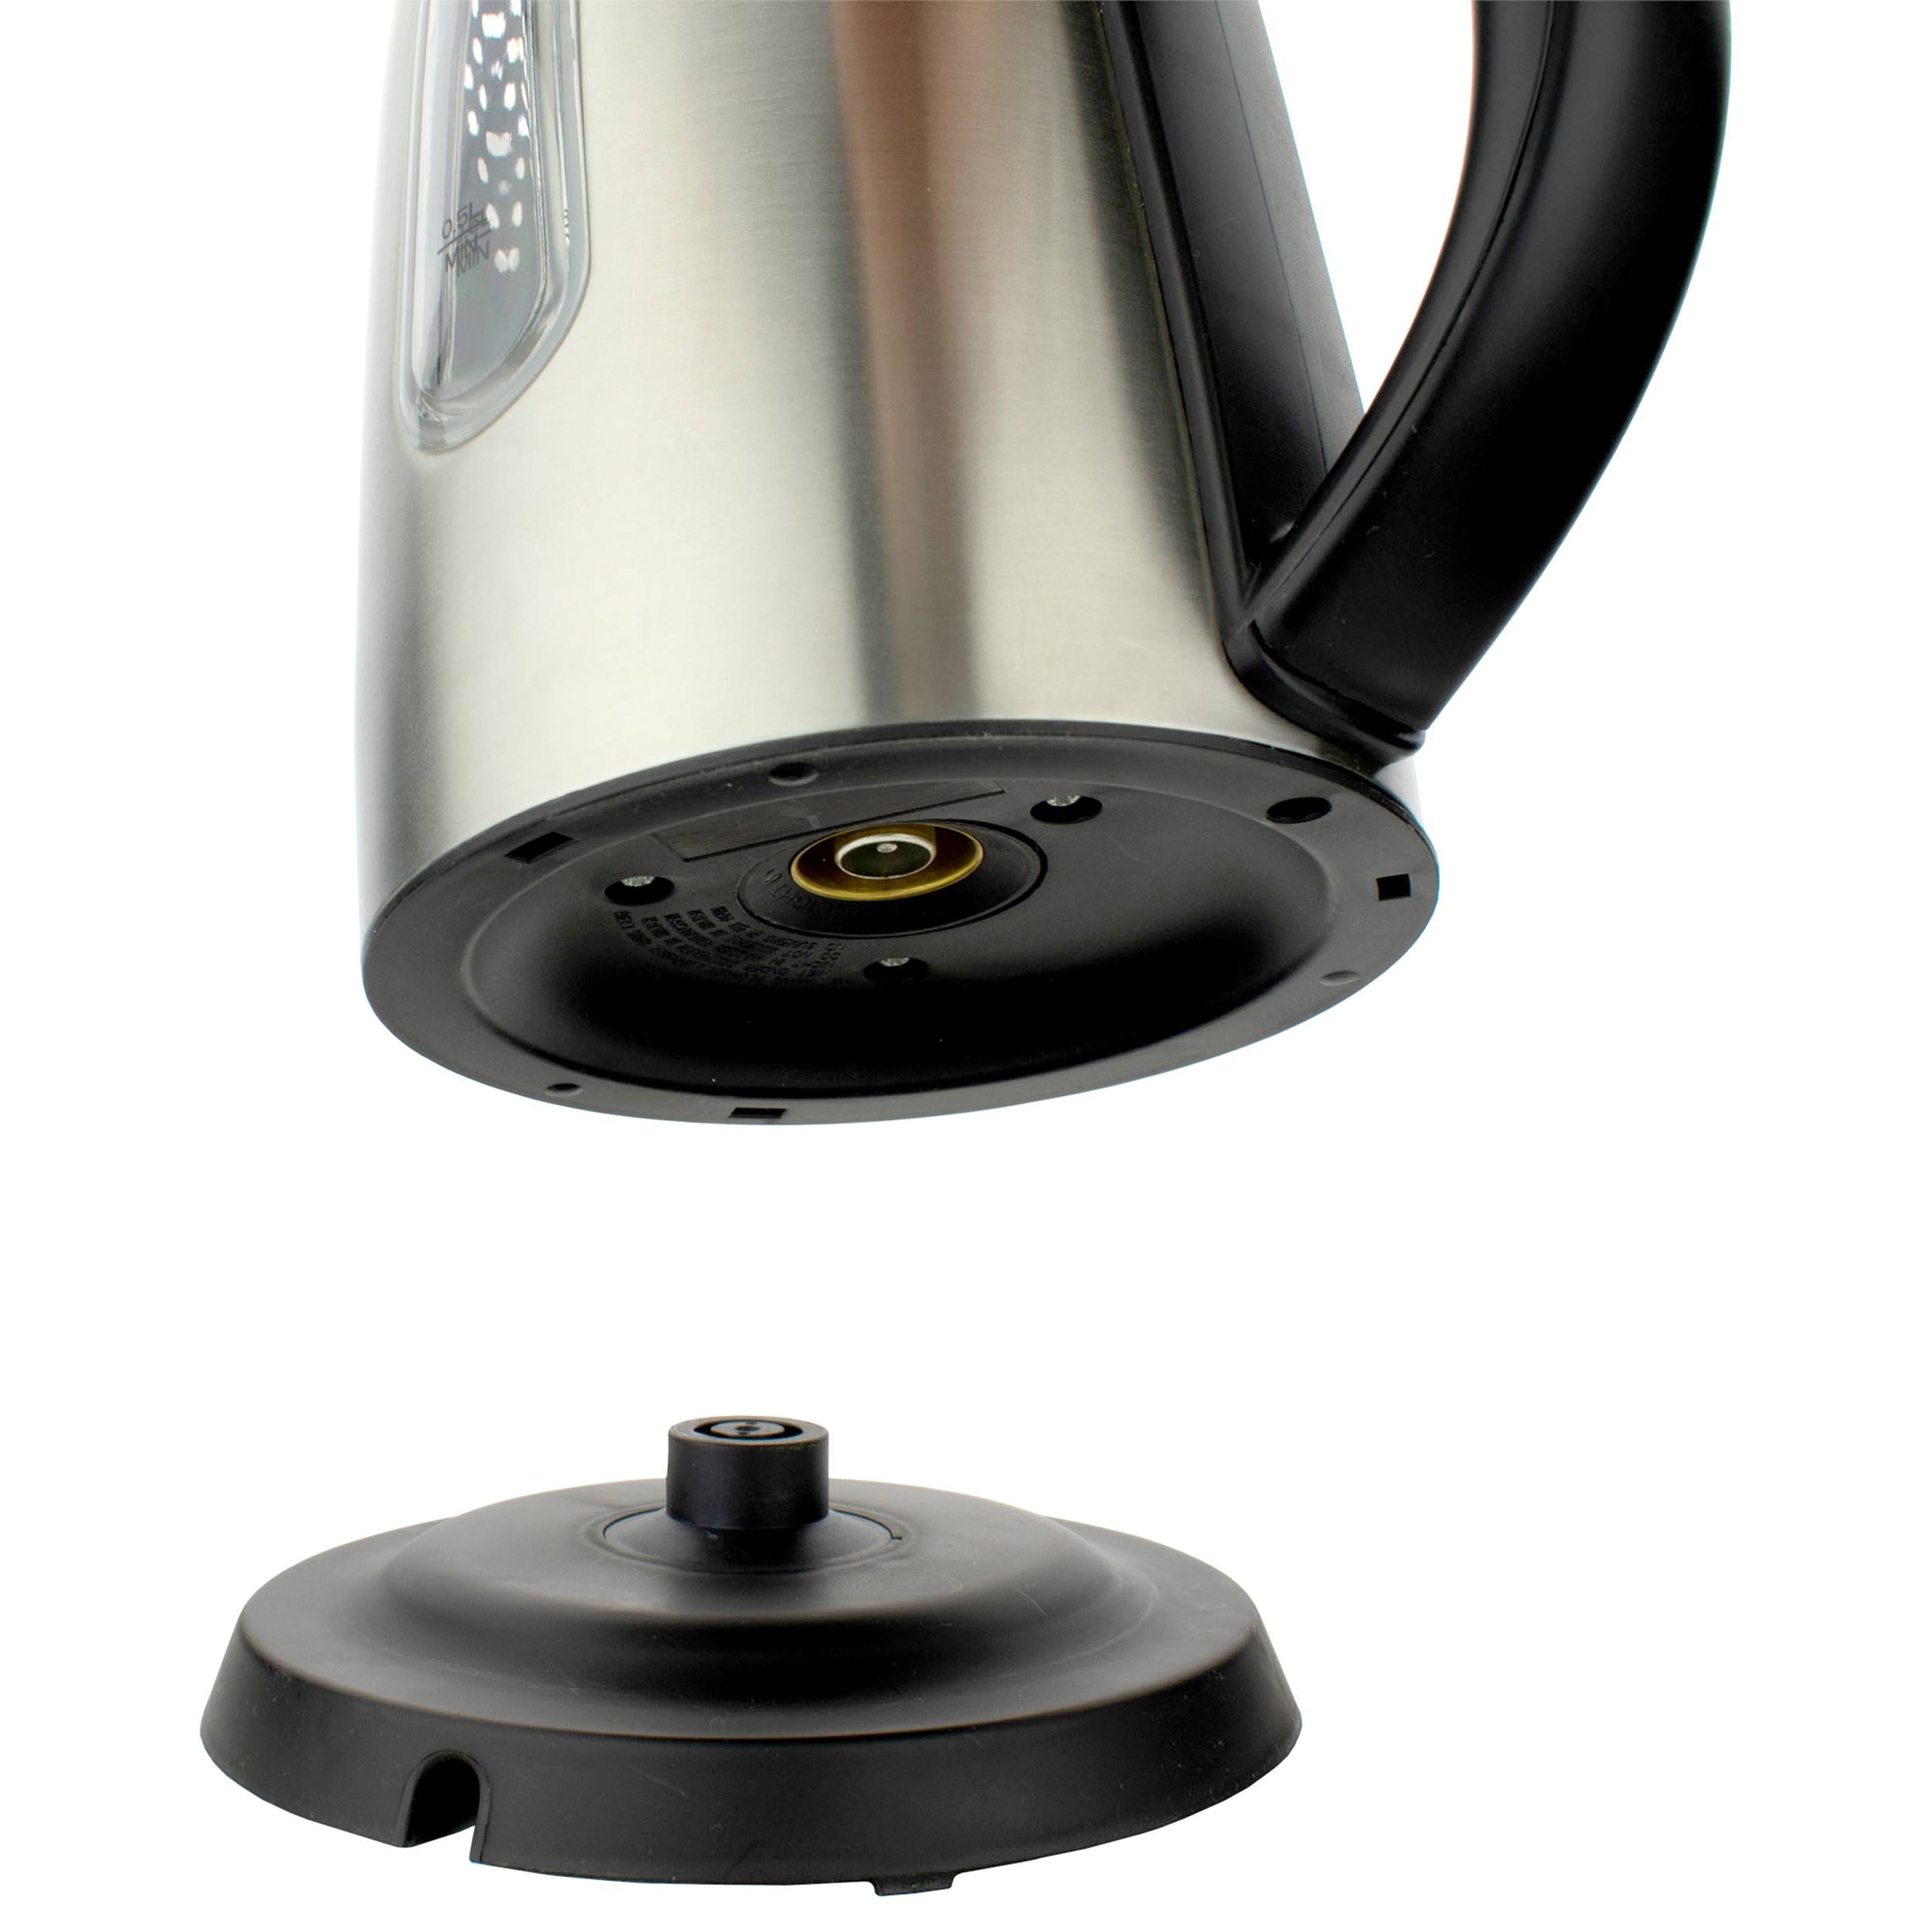 Chef'sChoice Brushed Stainless Steel 4-Cup Cordless Electric